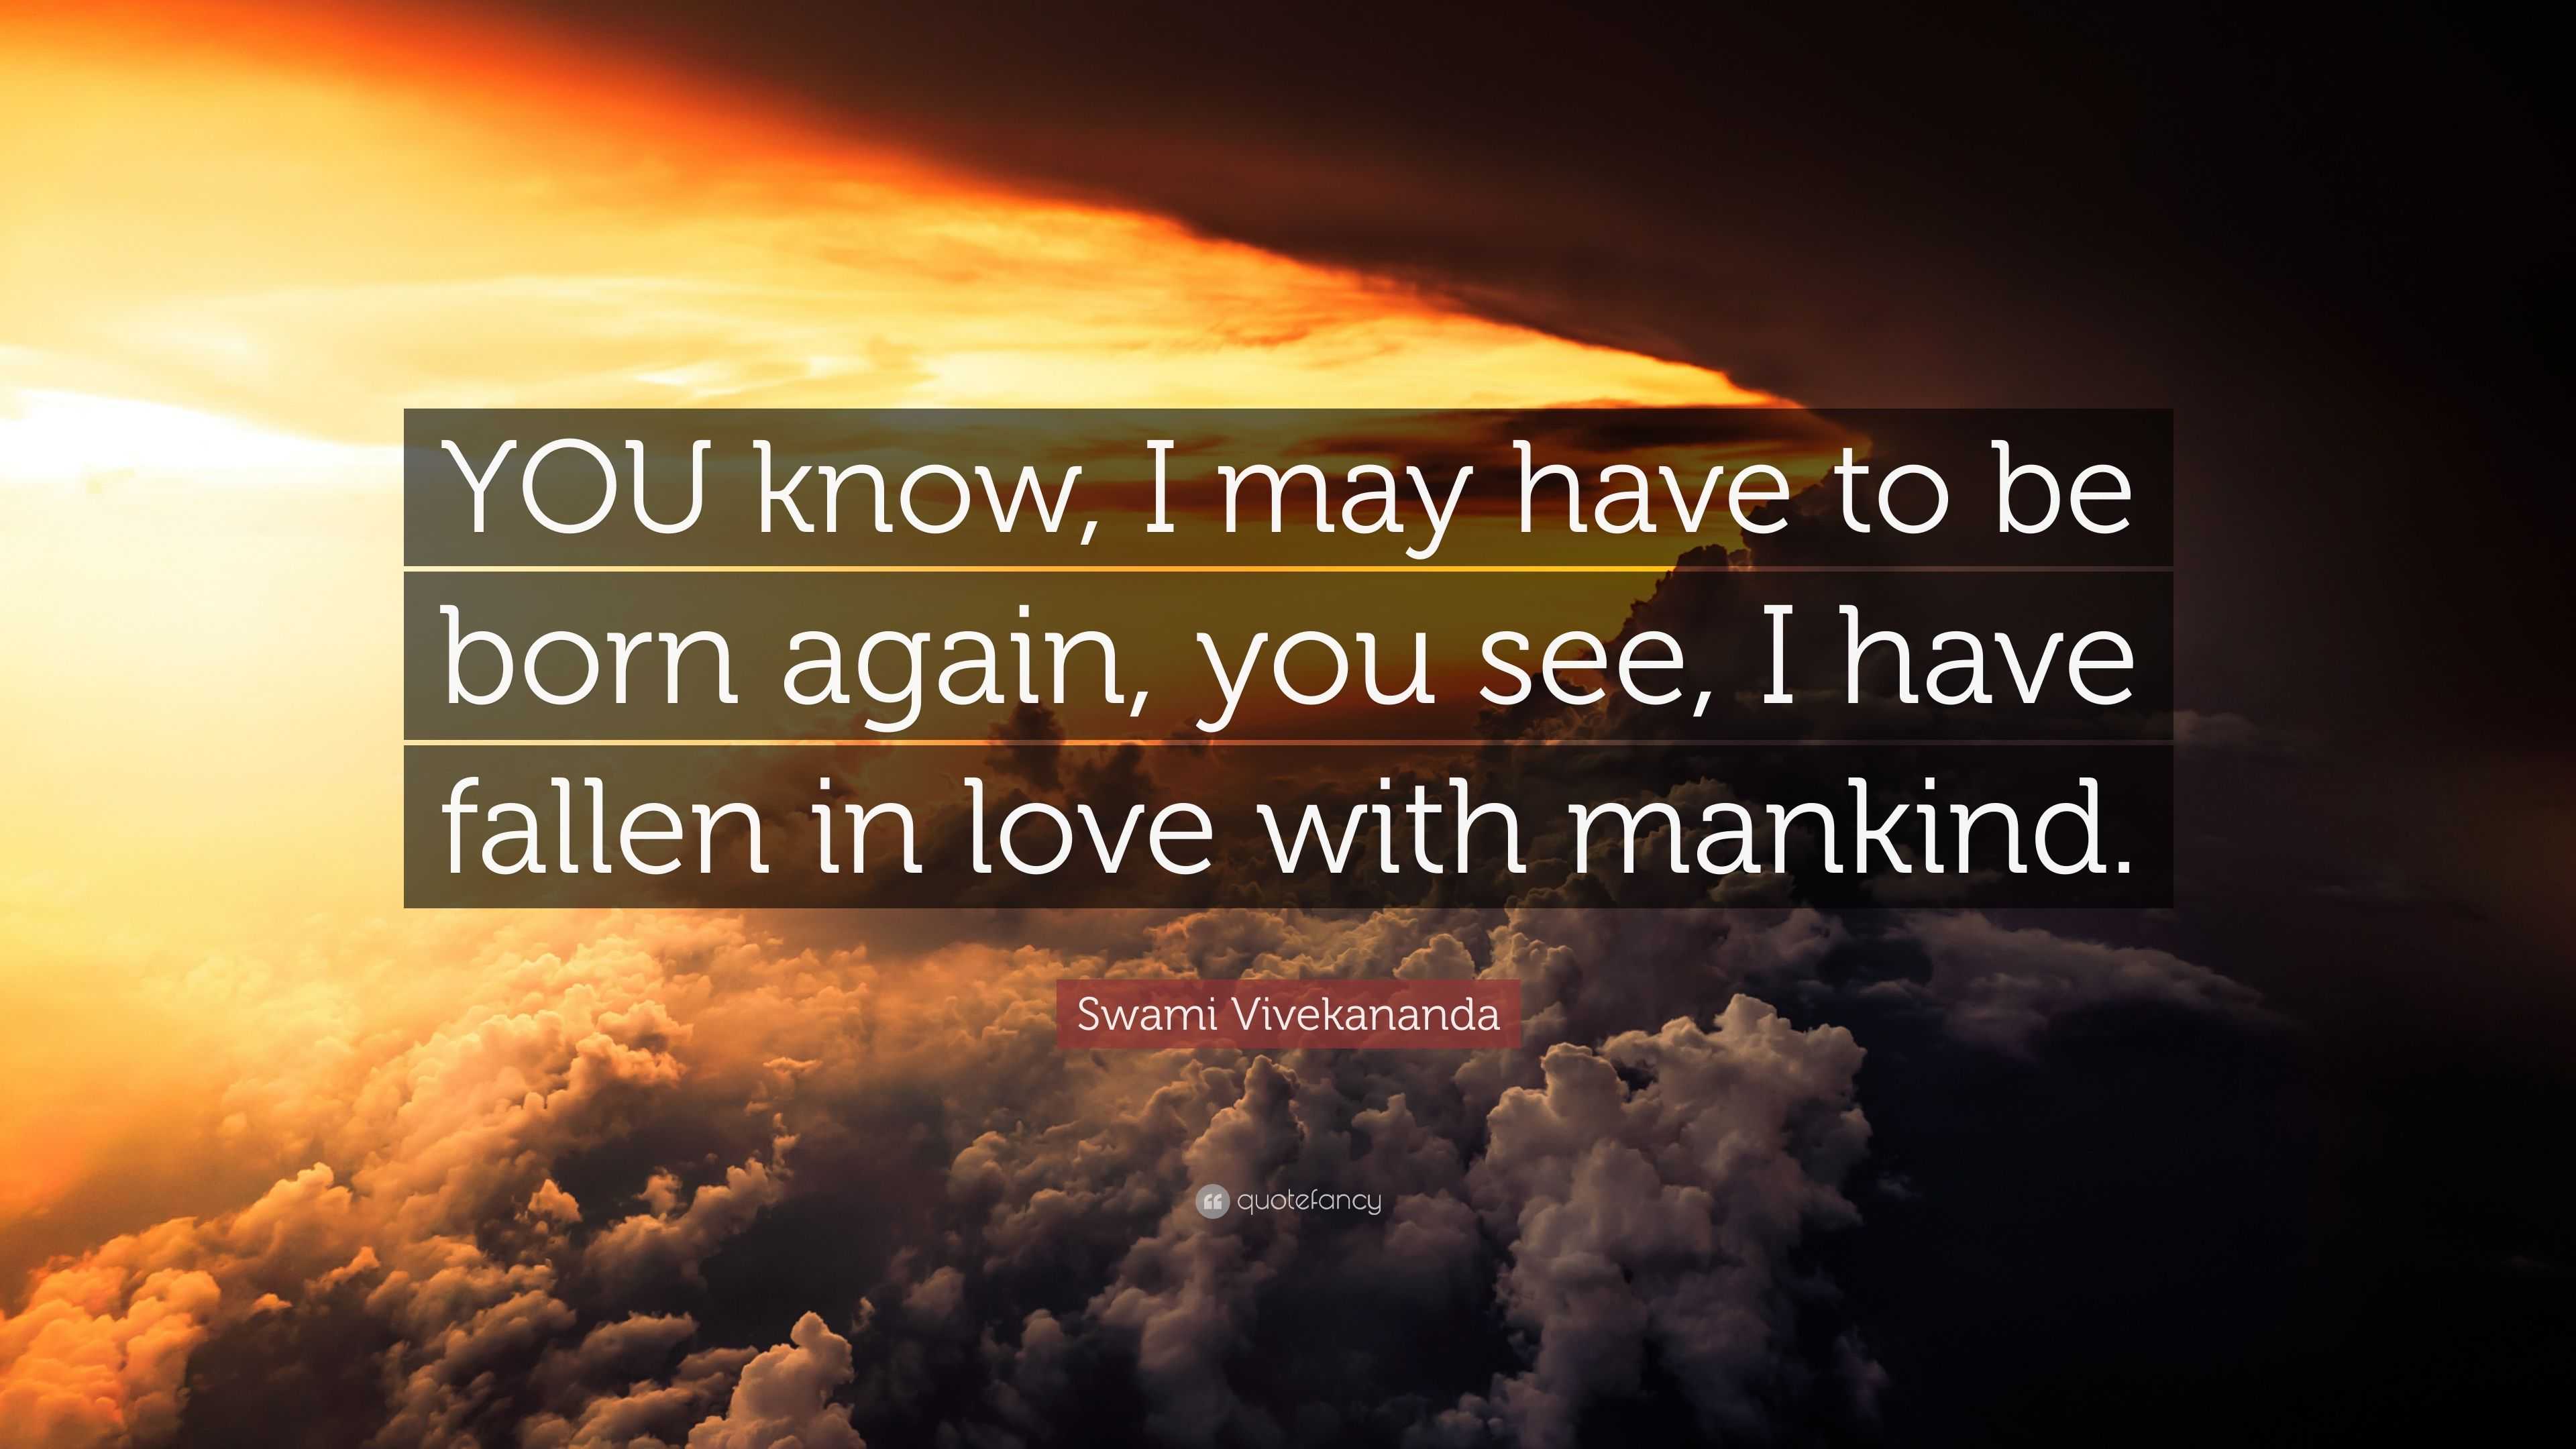 Swami Vivekananda Quote You Know I May Have To Be Born Again You See I Have Fallen In Love With Mankind 7 Wallpapers Quotefancy